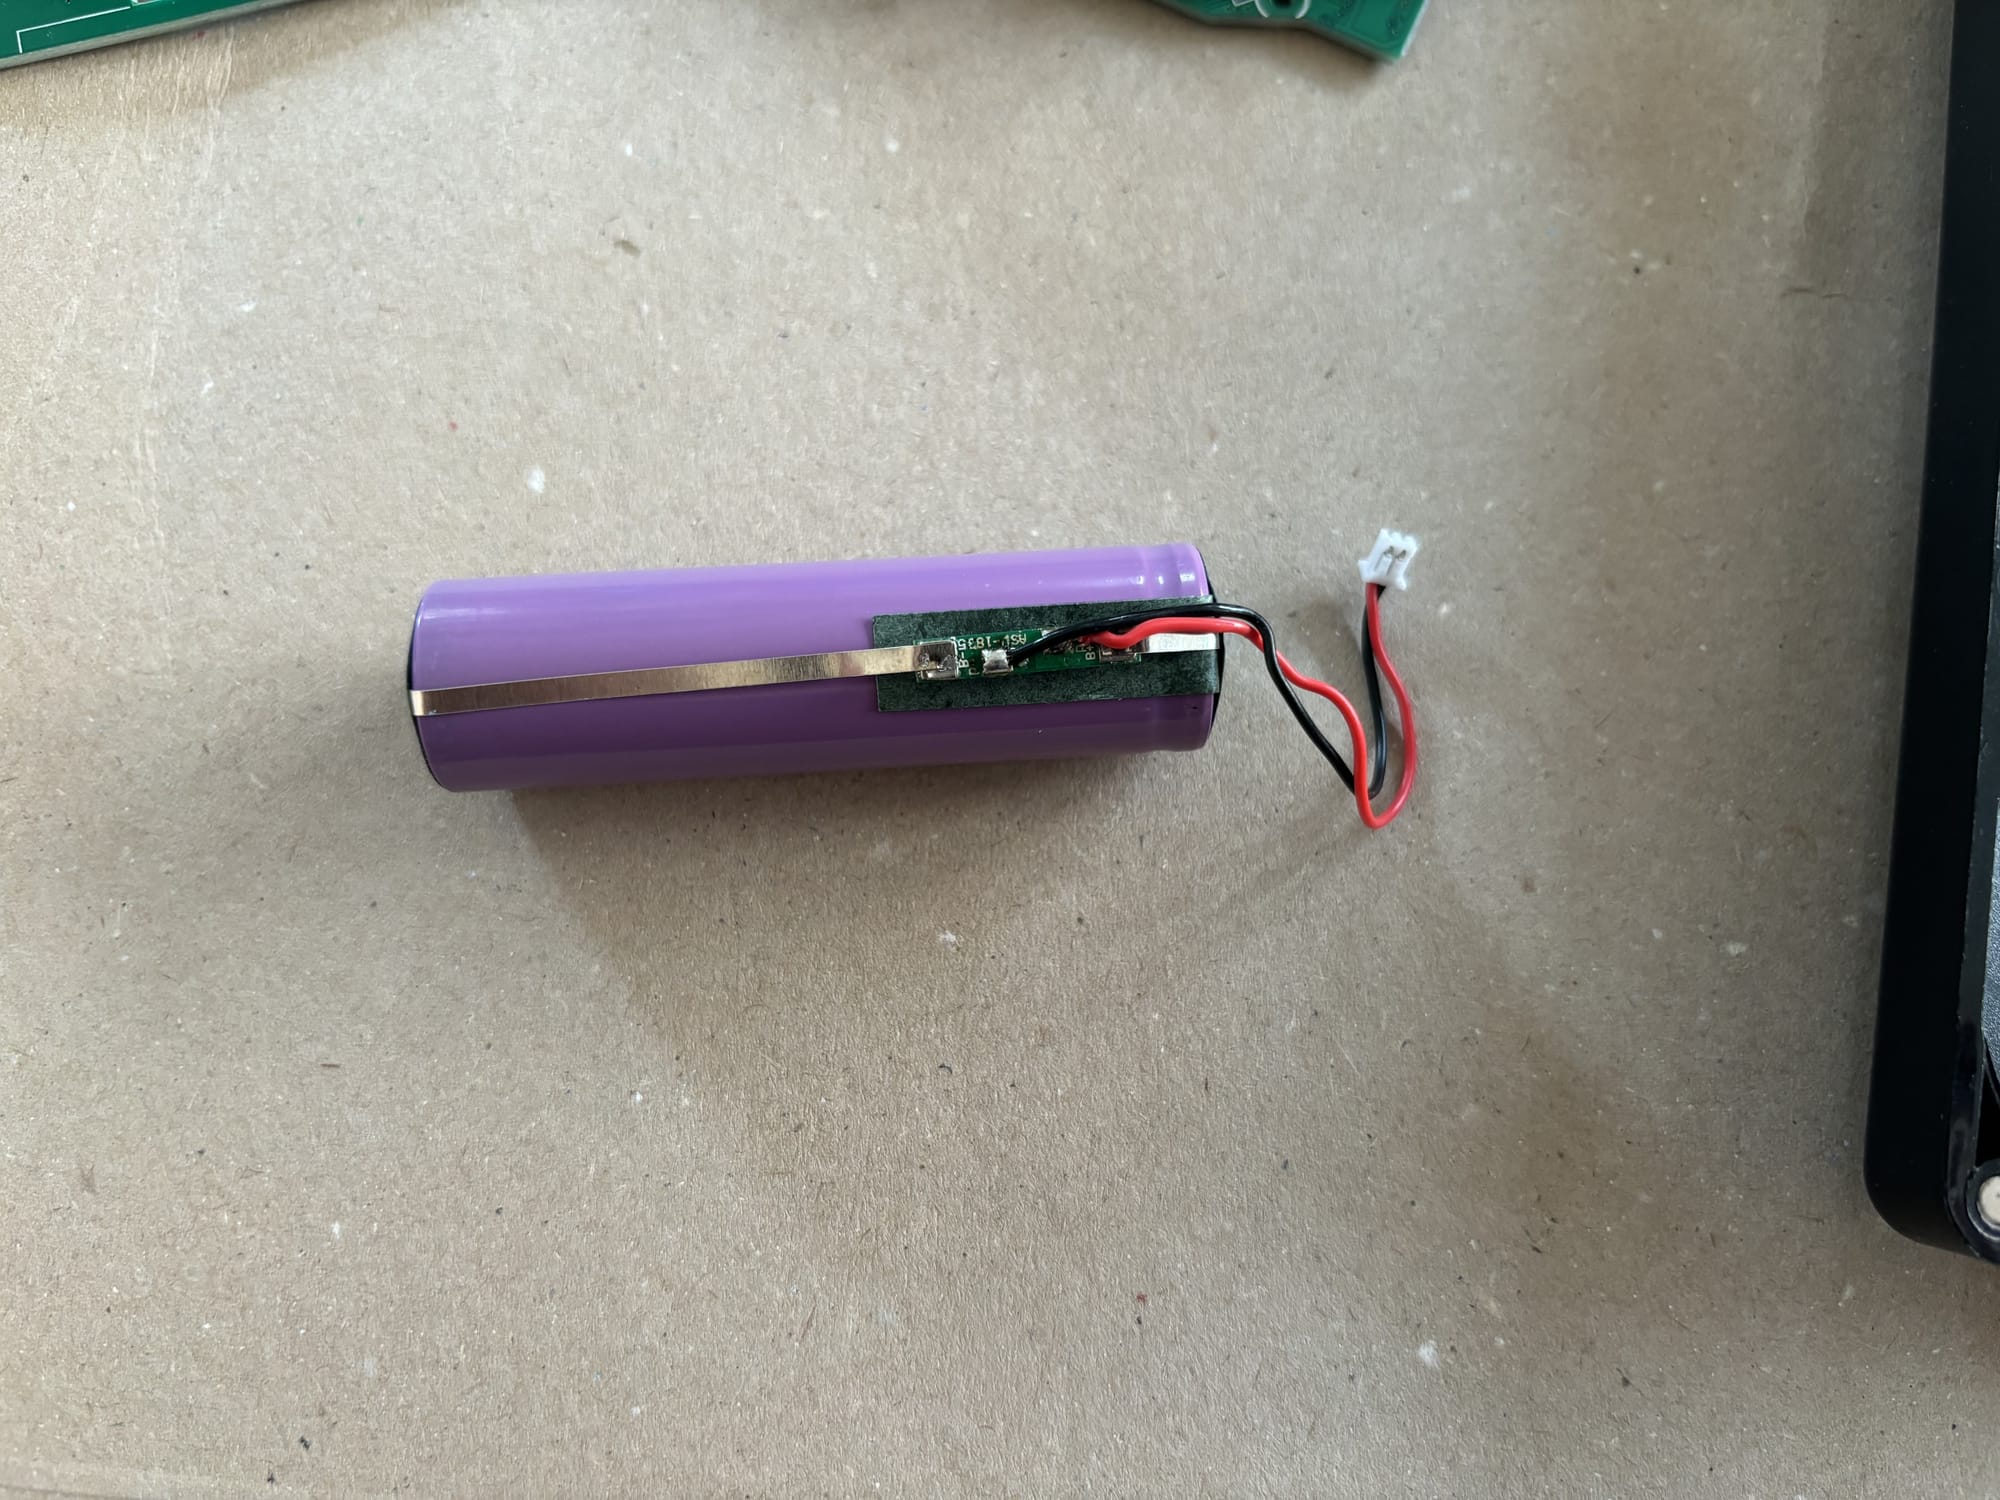 The battery with the plastic cover taken off and the protection circuit visible.